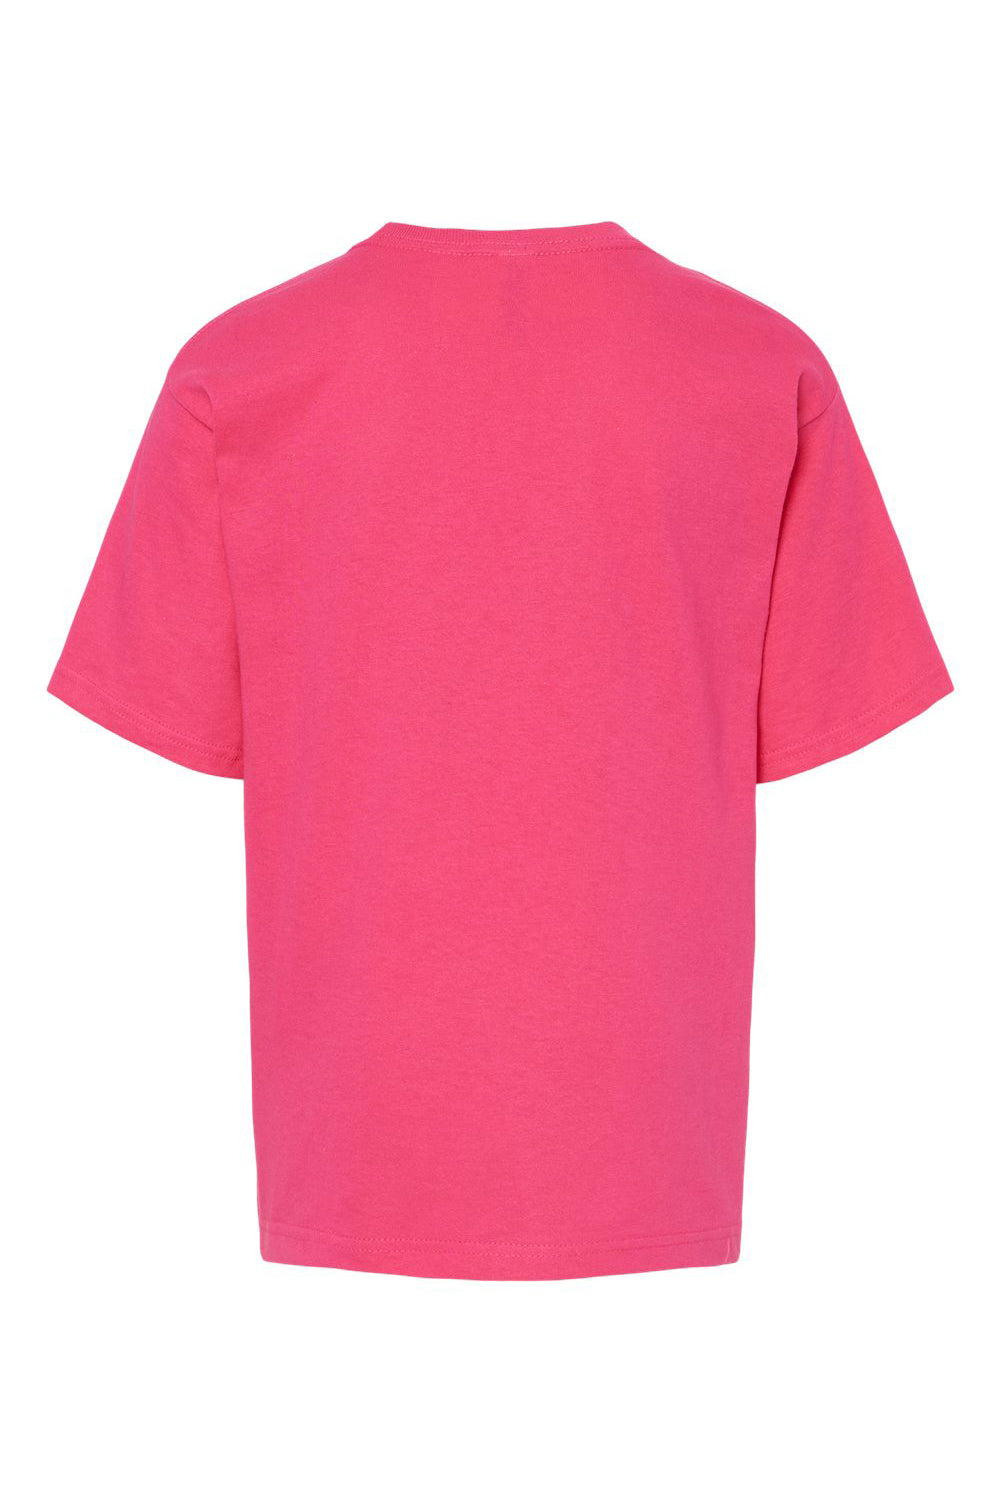 M&O 4850 Youth Gold Soft Touch Short Sleeve Crewneck T-Shirt Heliconia Pink Flat Back